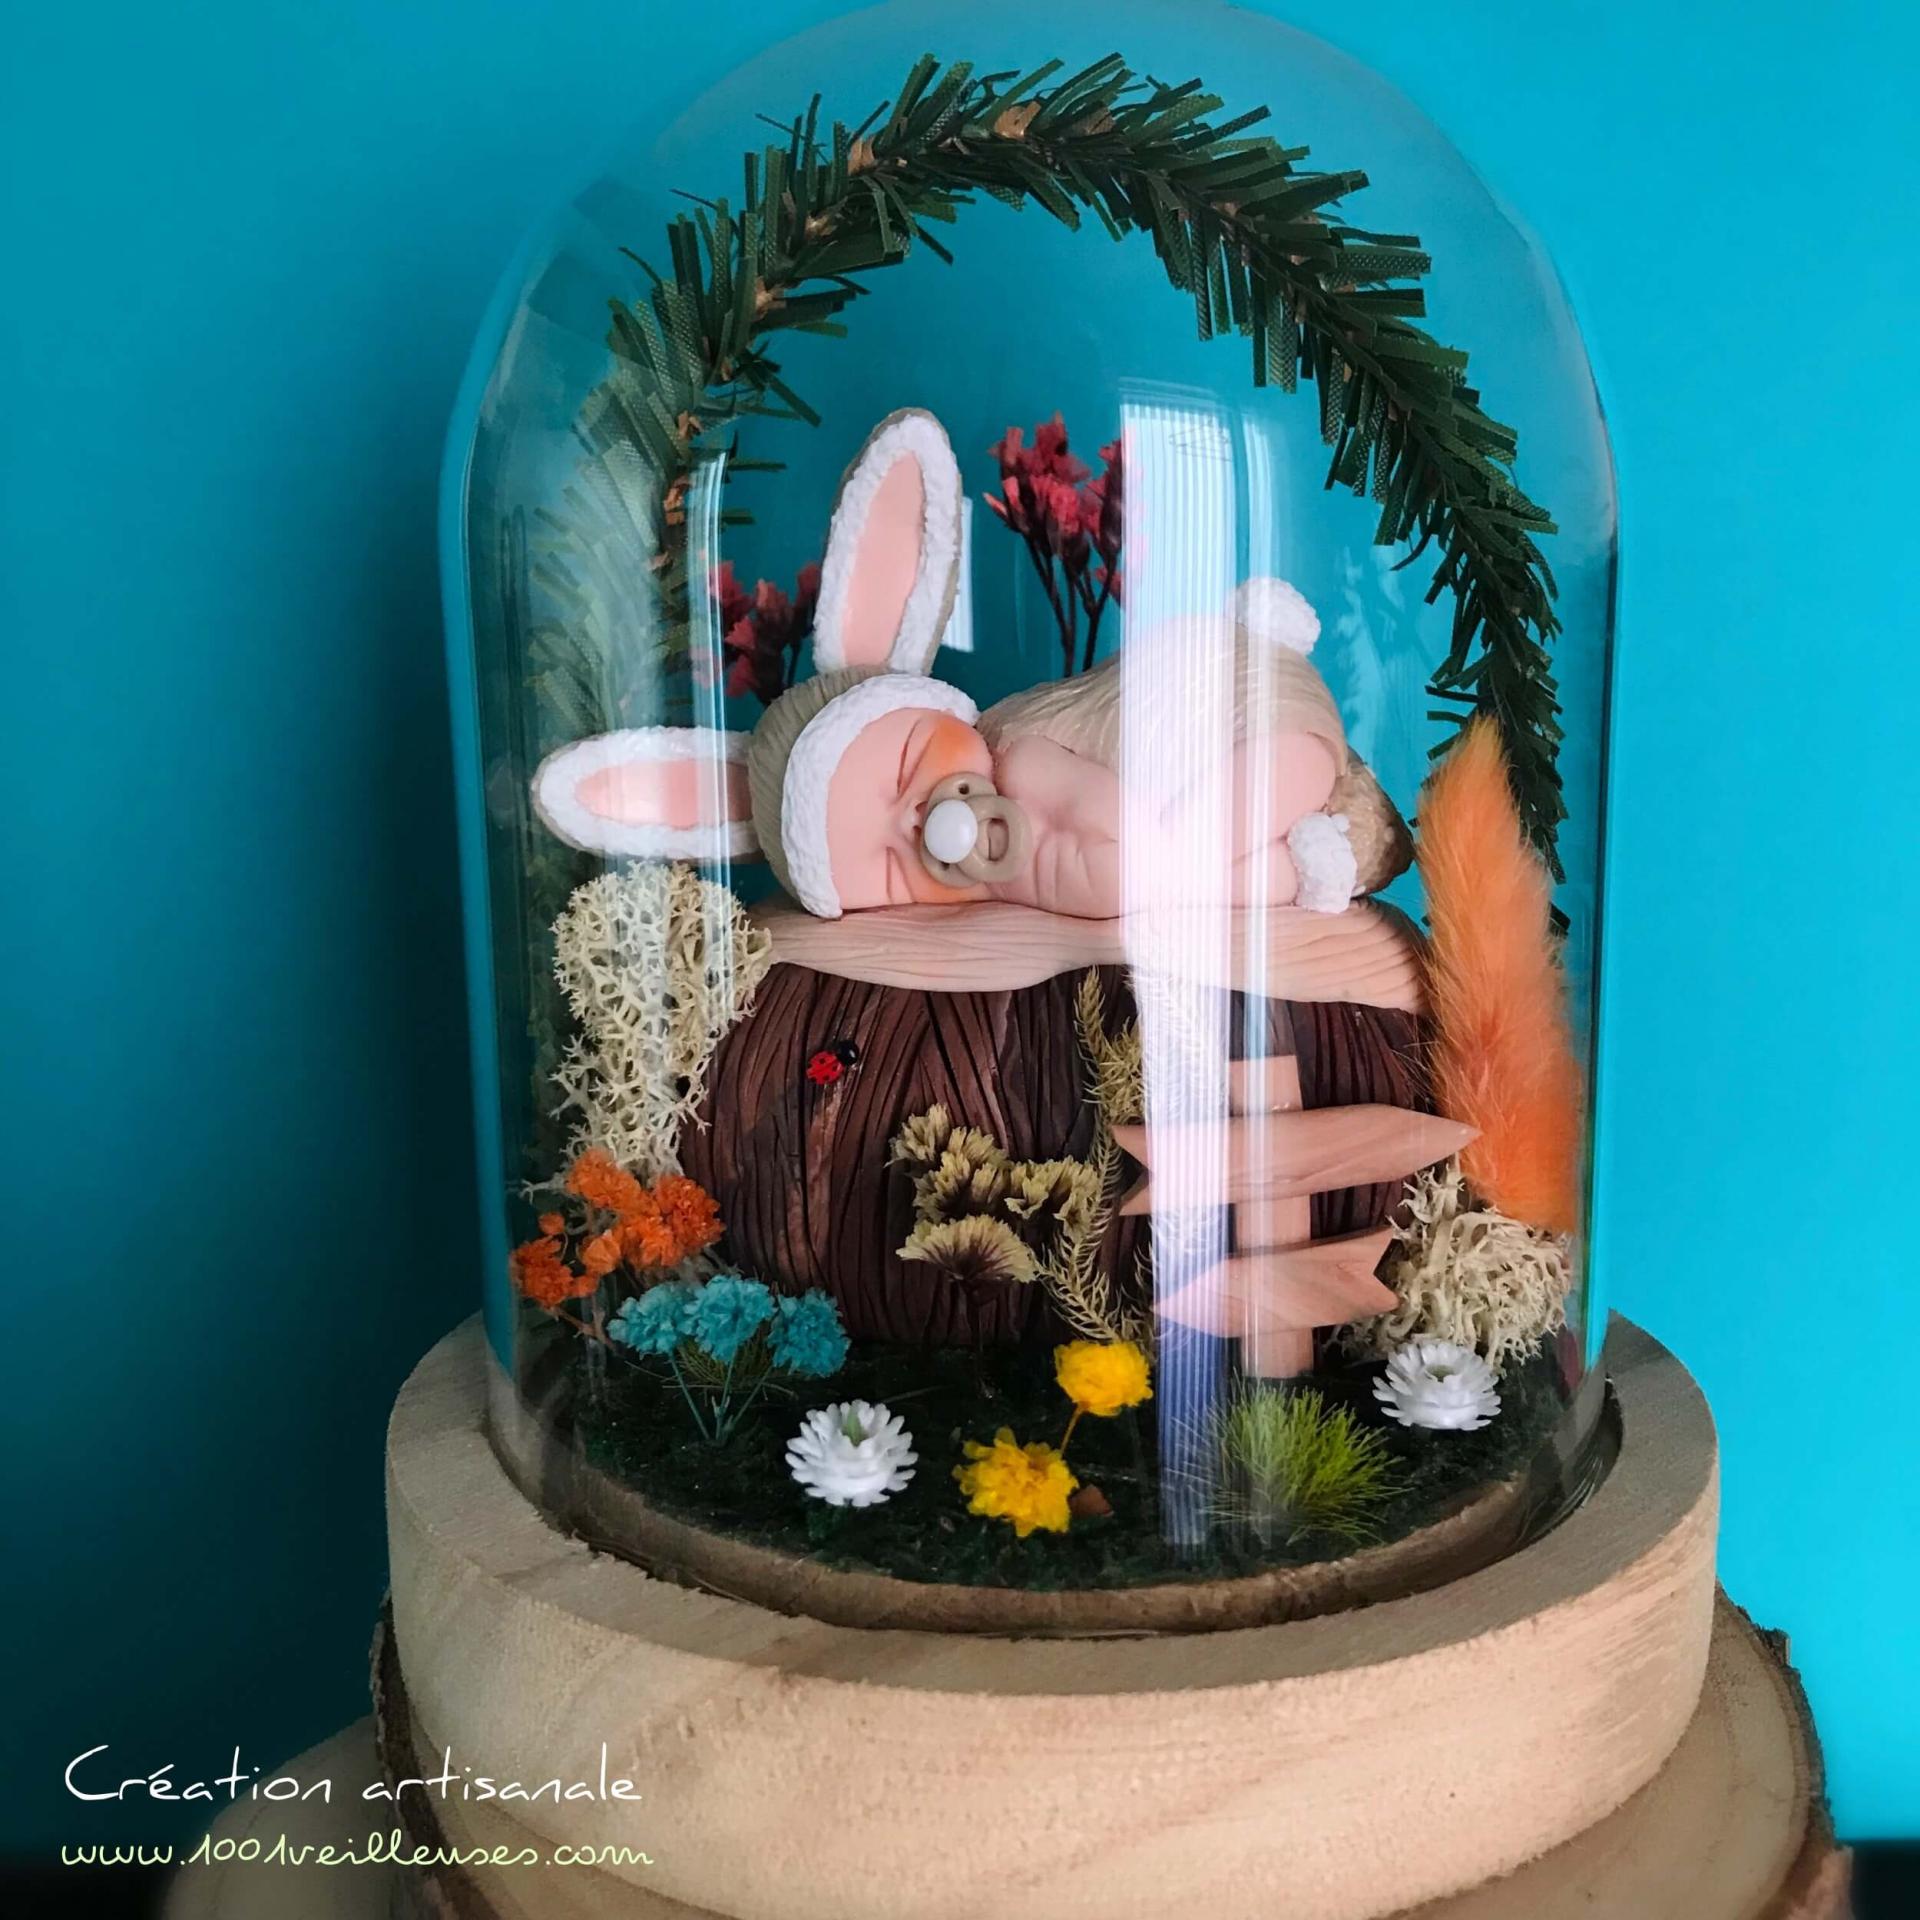 Personalized and handmade glass and wood night light presented turned off with a baby dressed as a rabbit under a glass dome